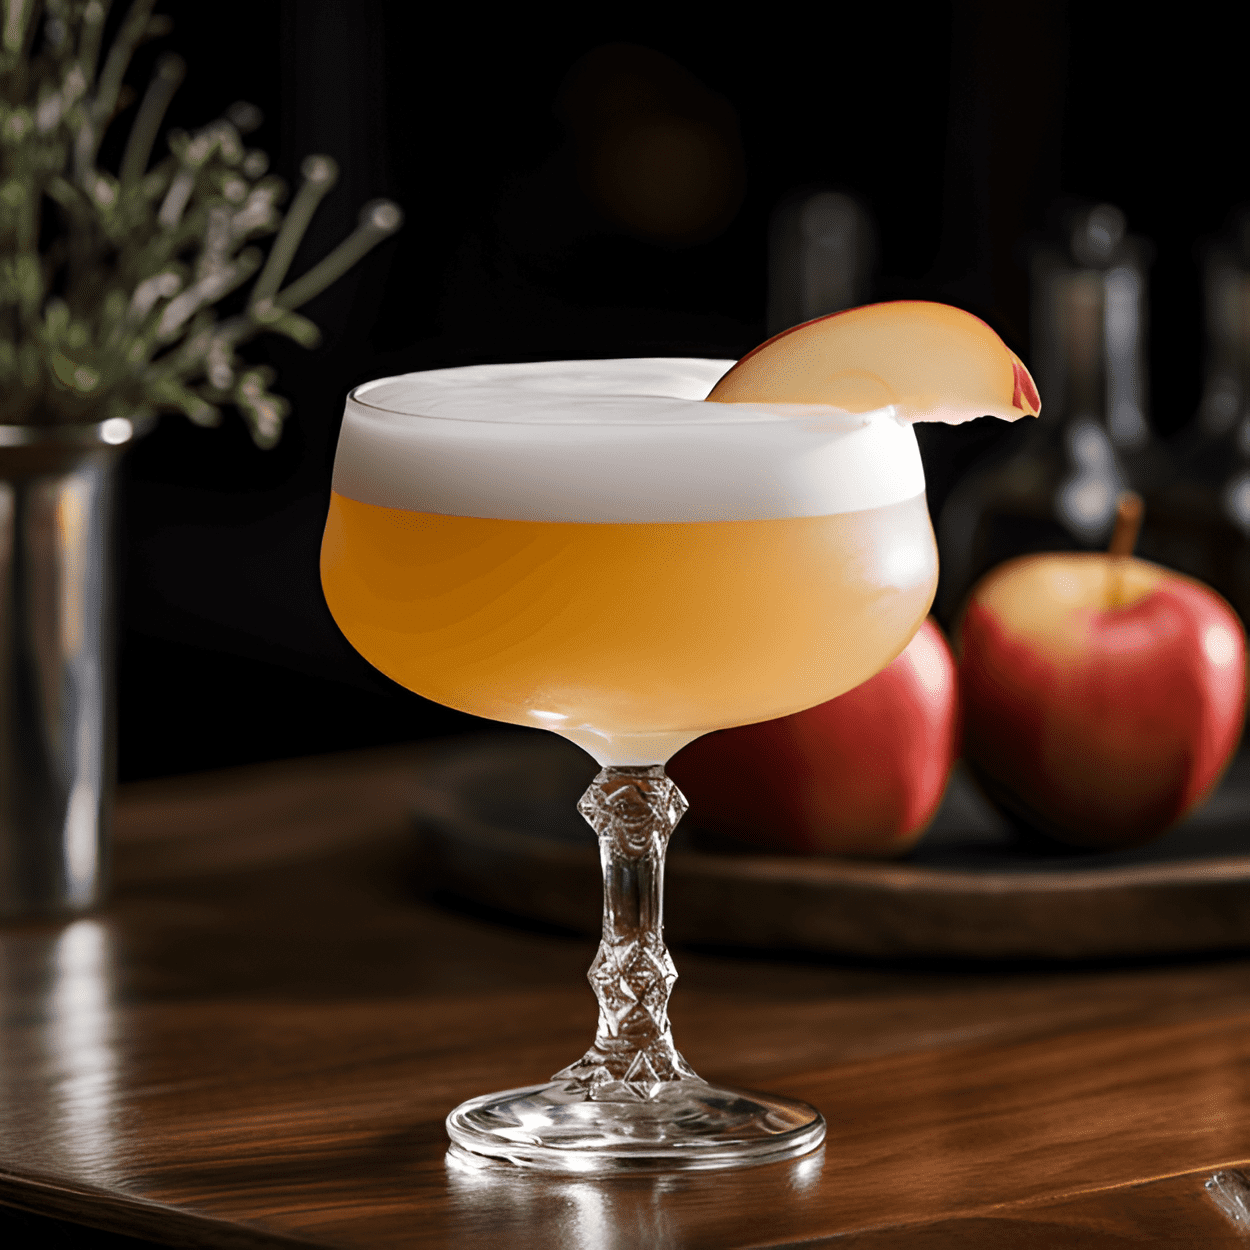 Forbidden Sour Cocktail Recipe - The Forbidden Sour is a complex blend of sweet, sour, and fruity flavors. The whiskey provides a strong, robust base, while the apple juice adds a sweet, fruity note. The lemon juice and simple syrup balance out the sweetness with a tart, sour edge.